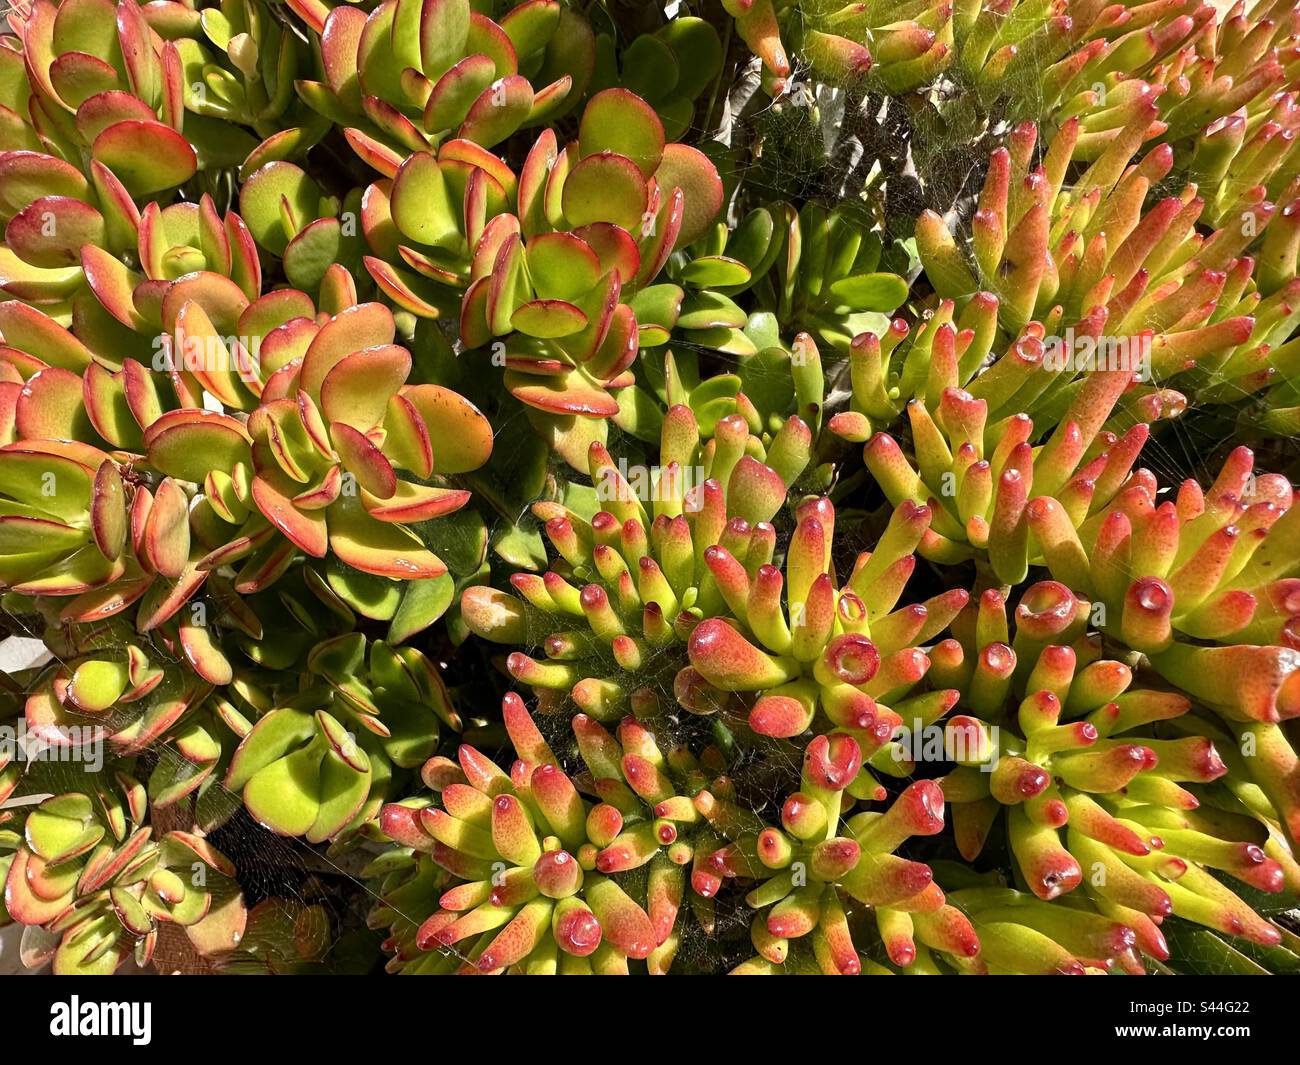 Two types of jade plant, Hummels sunset and Gollum jade in the same pot Stock Photo